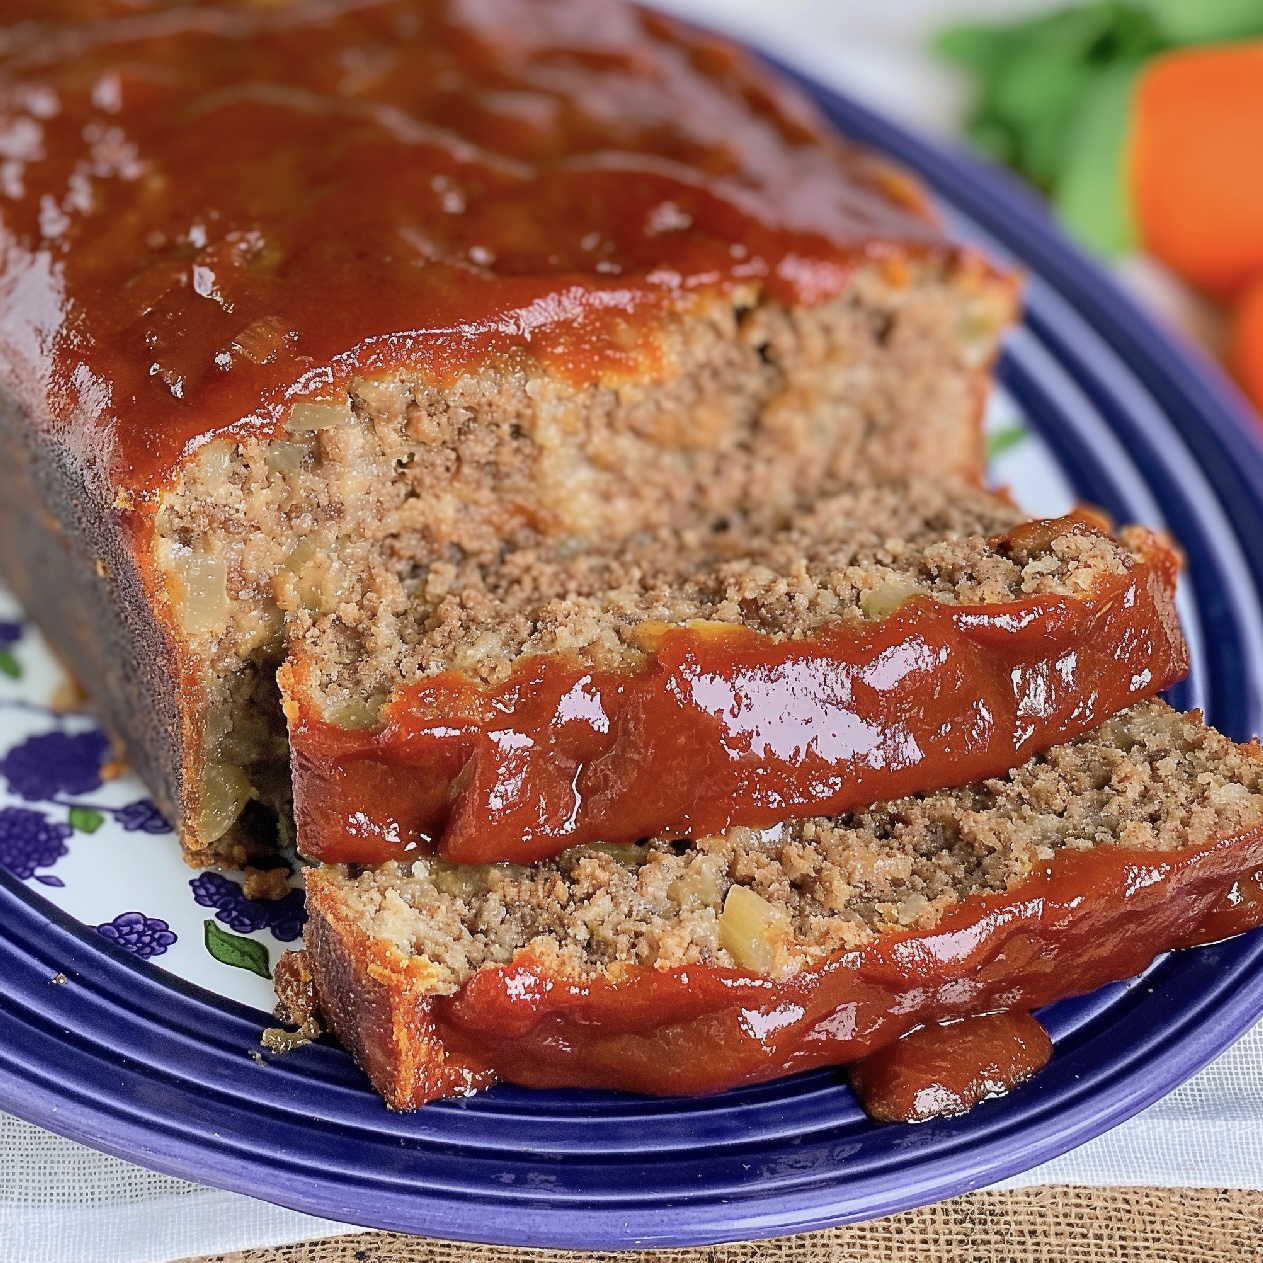  Discover Creative Breadcrumb Alternatives for Your Meatloaf